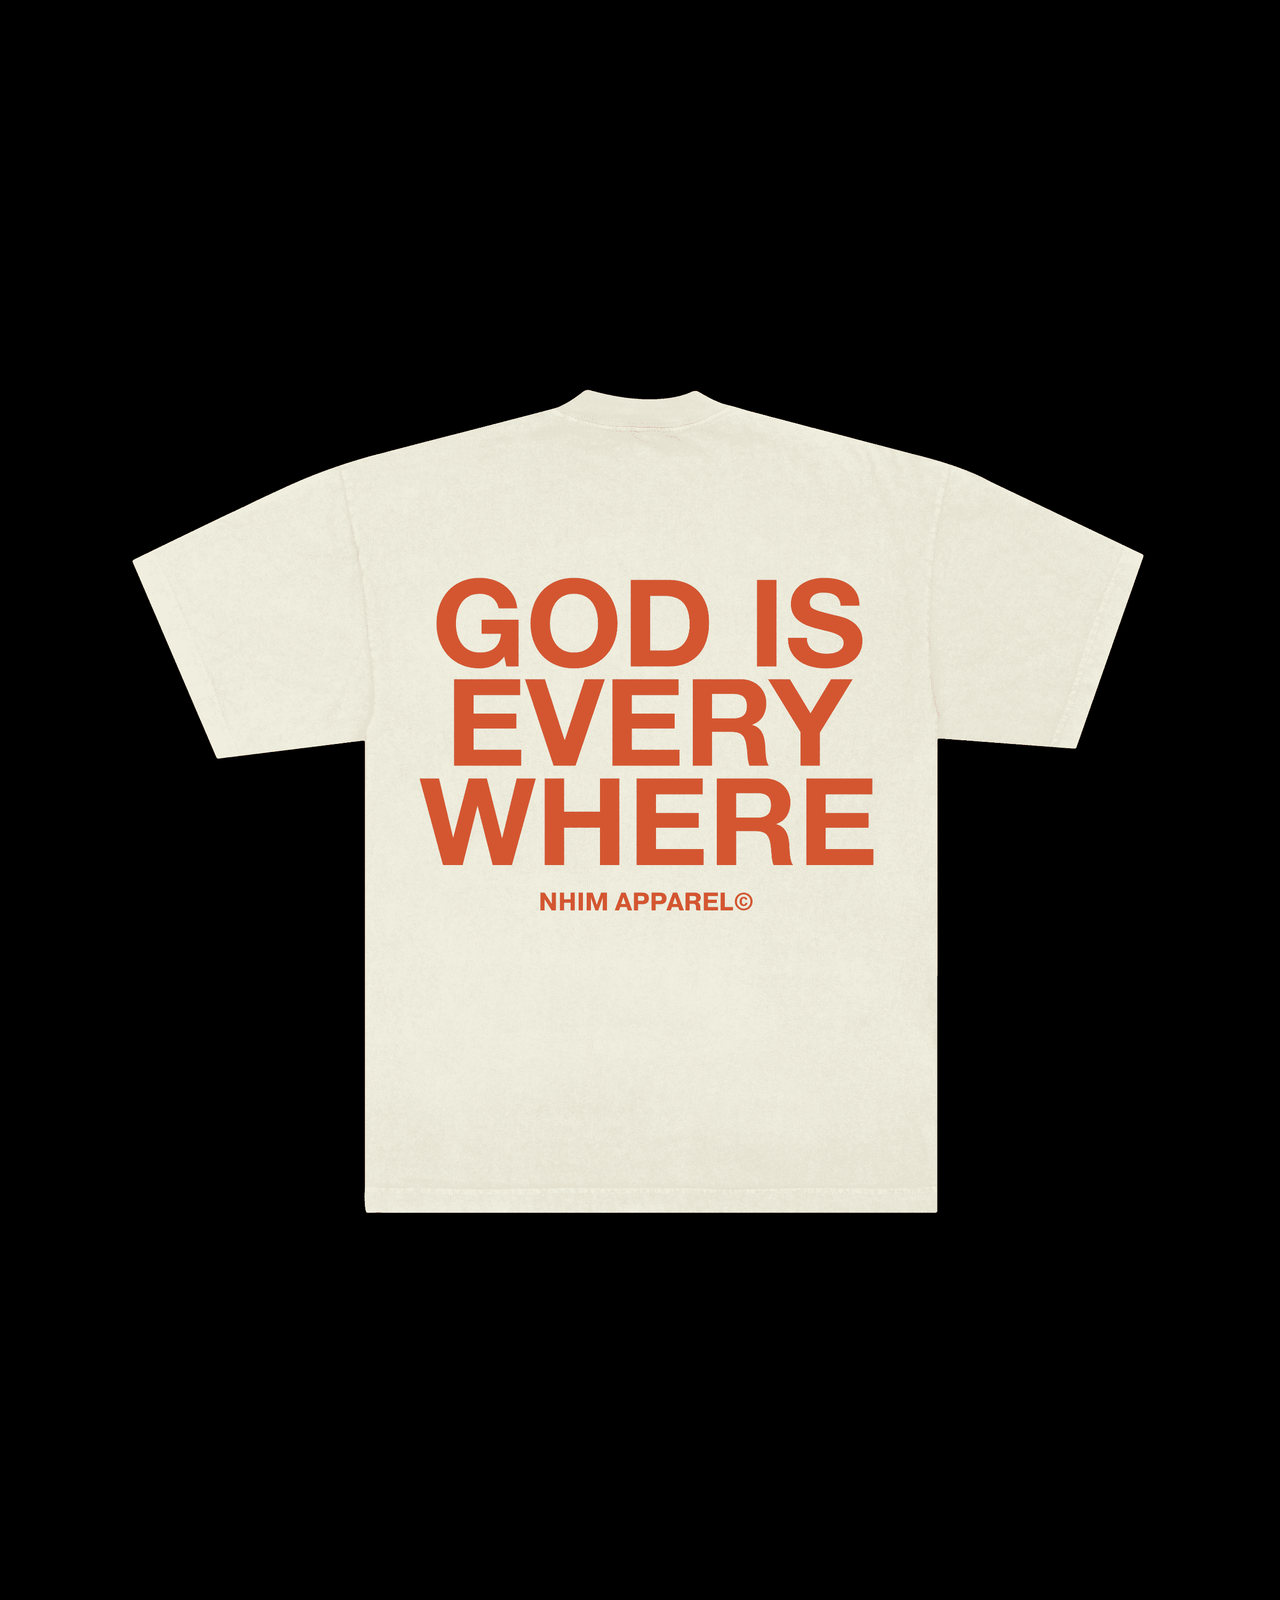 Christian t shirt. God is Everywhere. Made in USA. NHiM Apparel Christian Clothing Company. God is everywhere white t shirt.